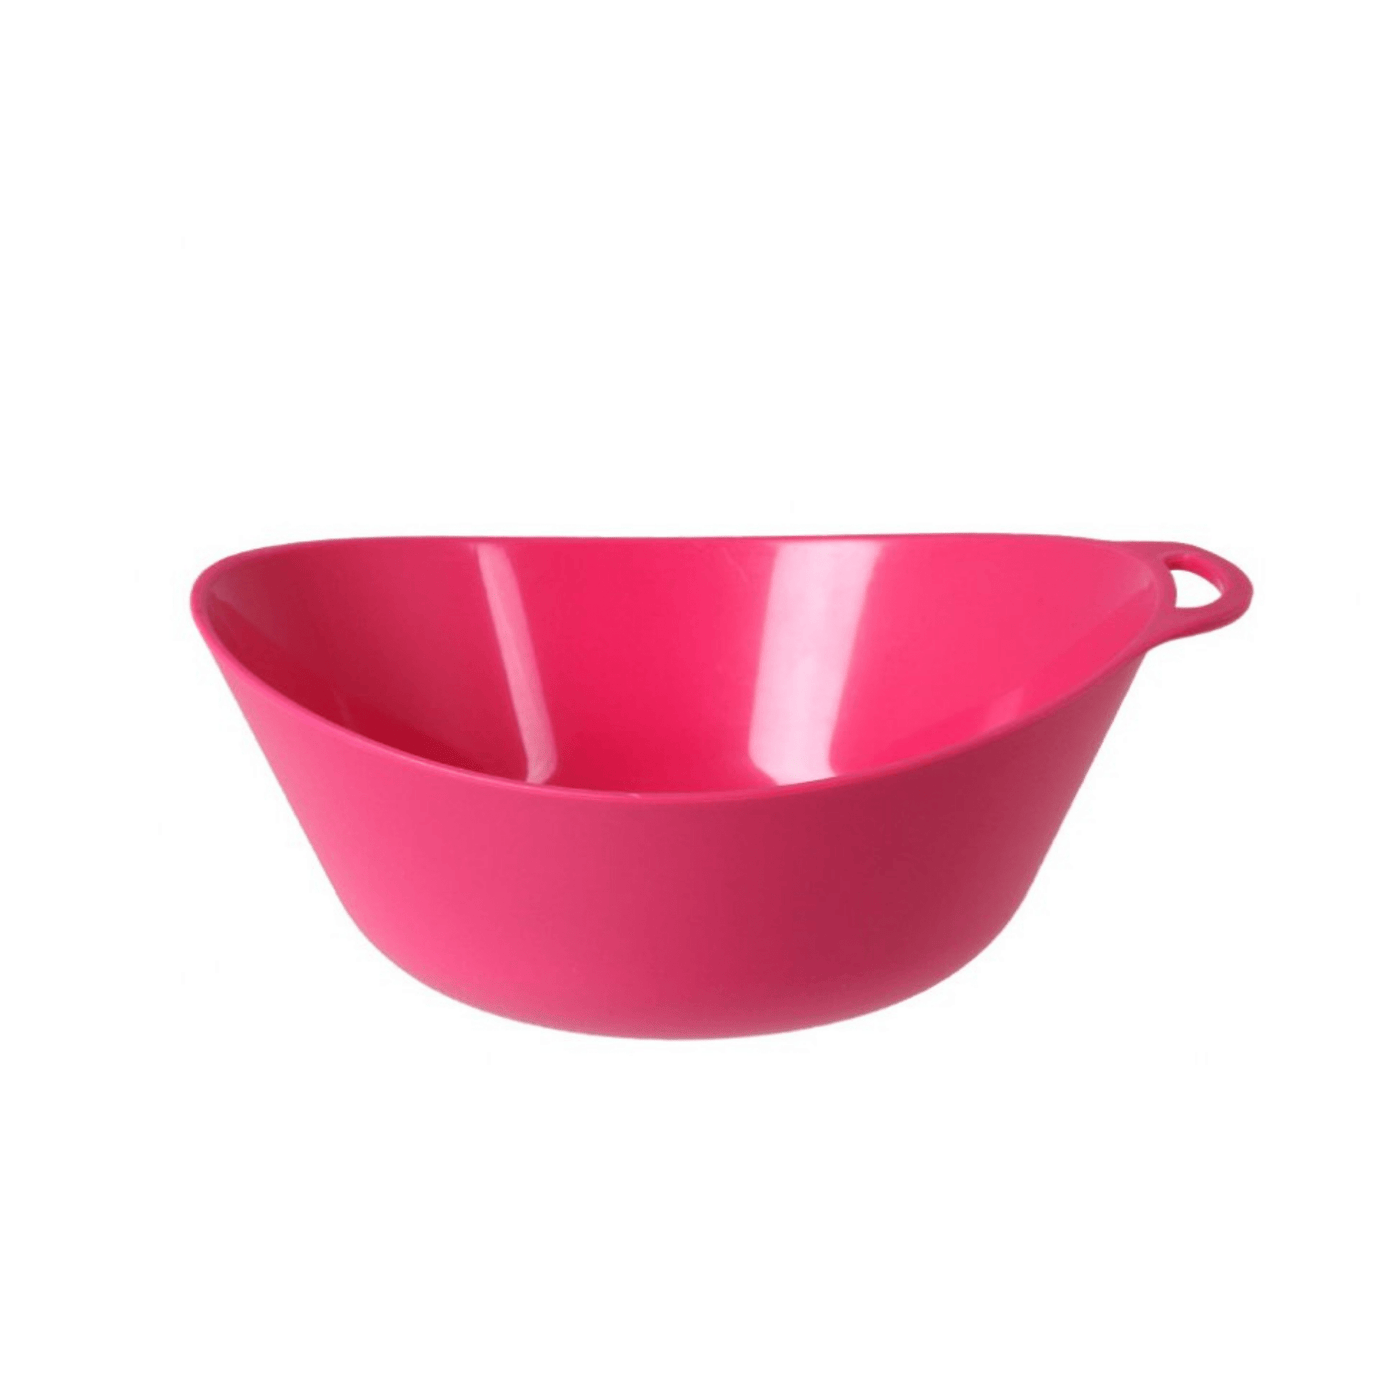 Lifeventure Ellipse Bowl | Outdoor and Camping Cookware | Further Faster Christchurch NZ #pink